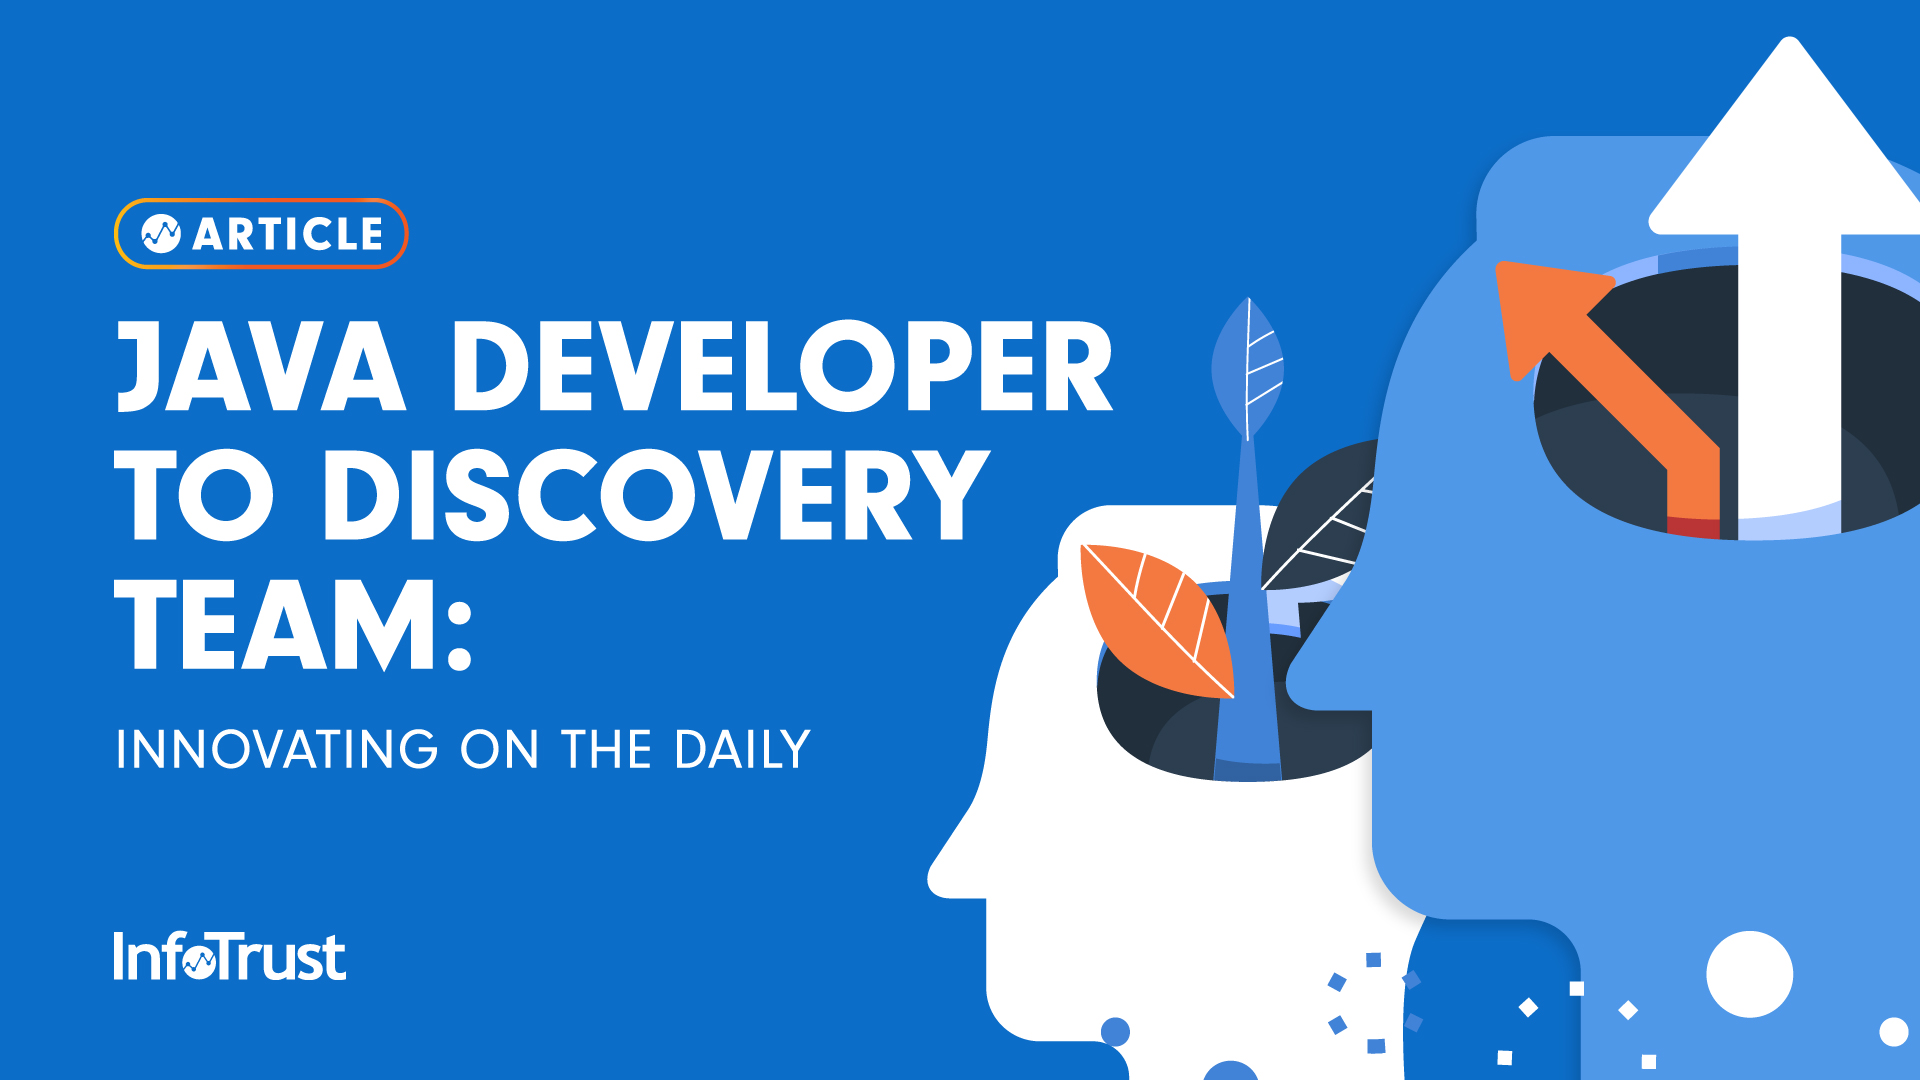 Java Developer to Discovery Team: Innovating on the Daily